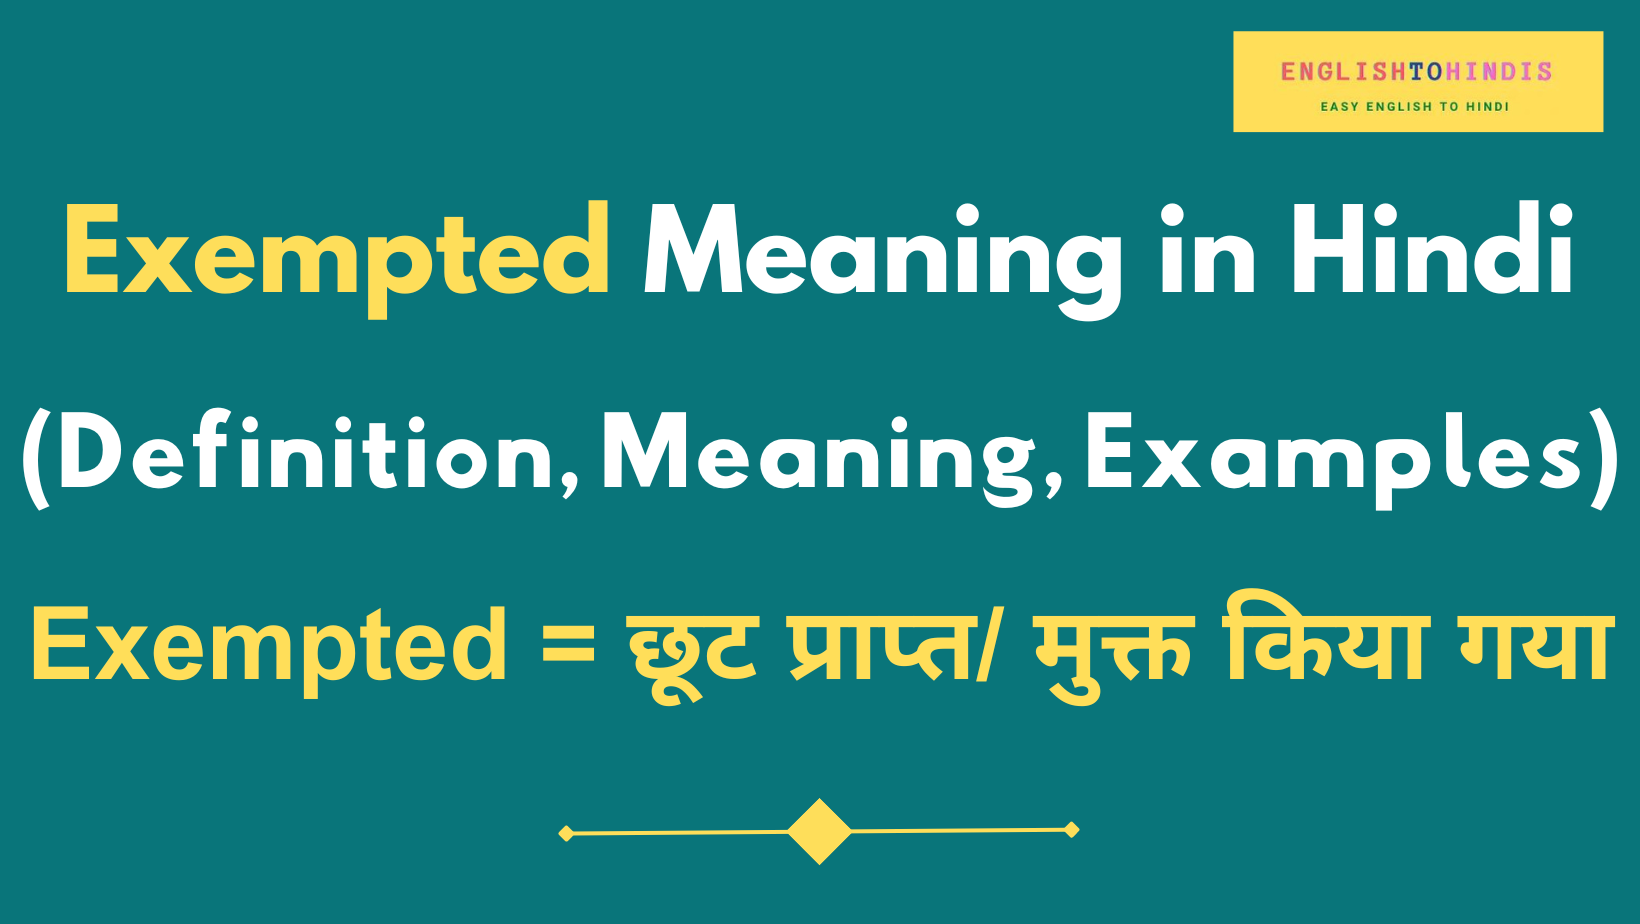 Exempted Meaning in Hindi